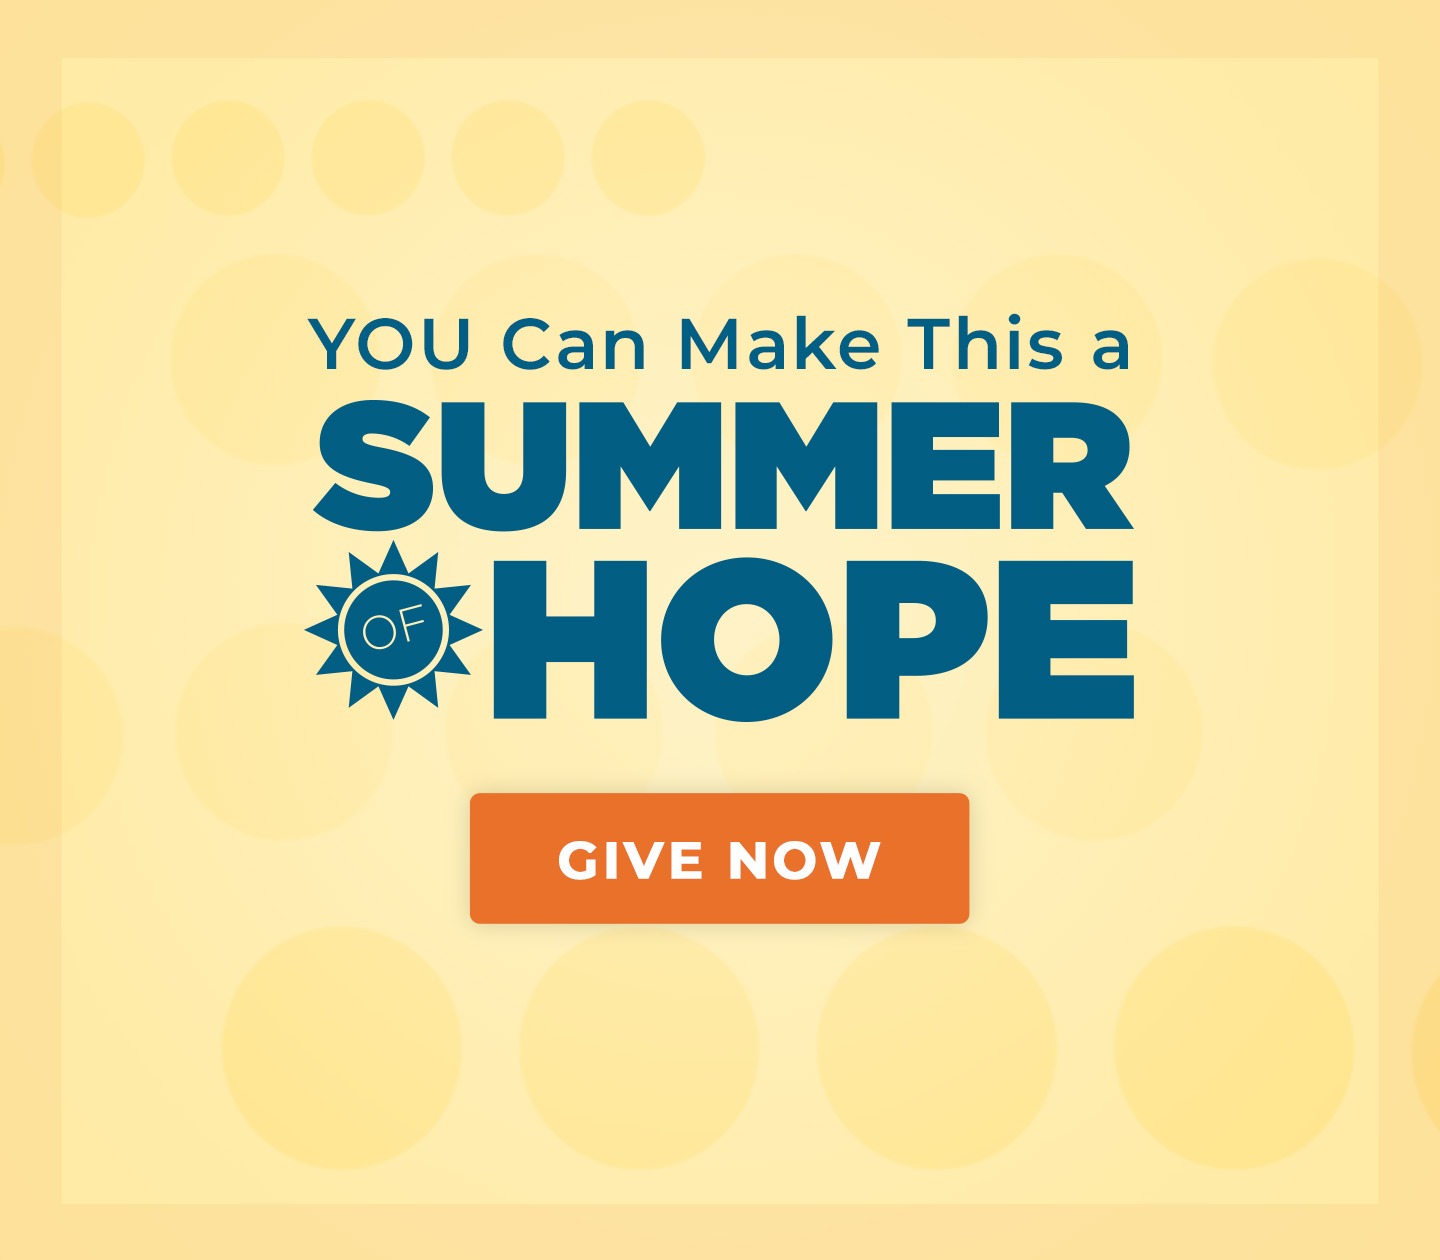 Life Path York needs your help to make this a Summer of Hope.